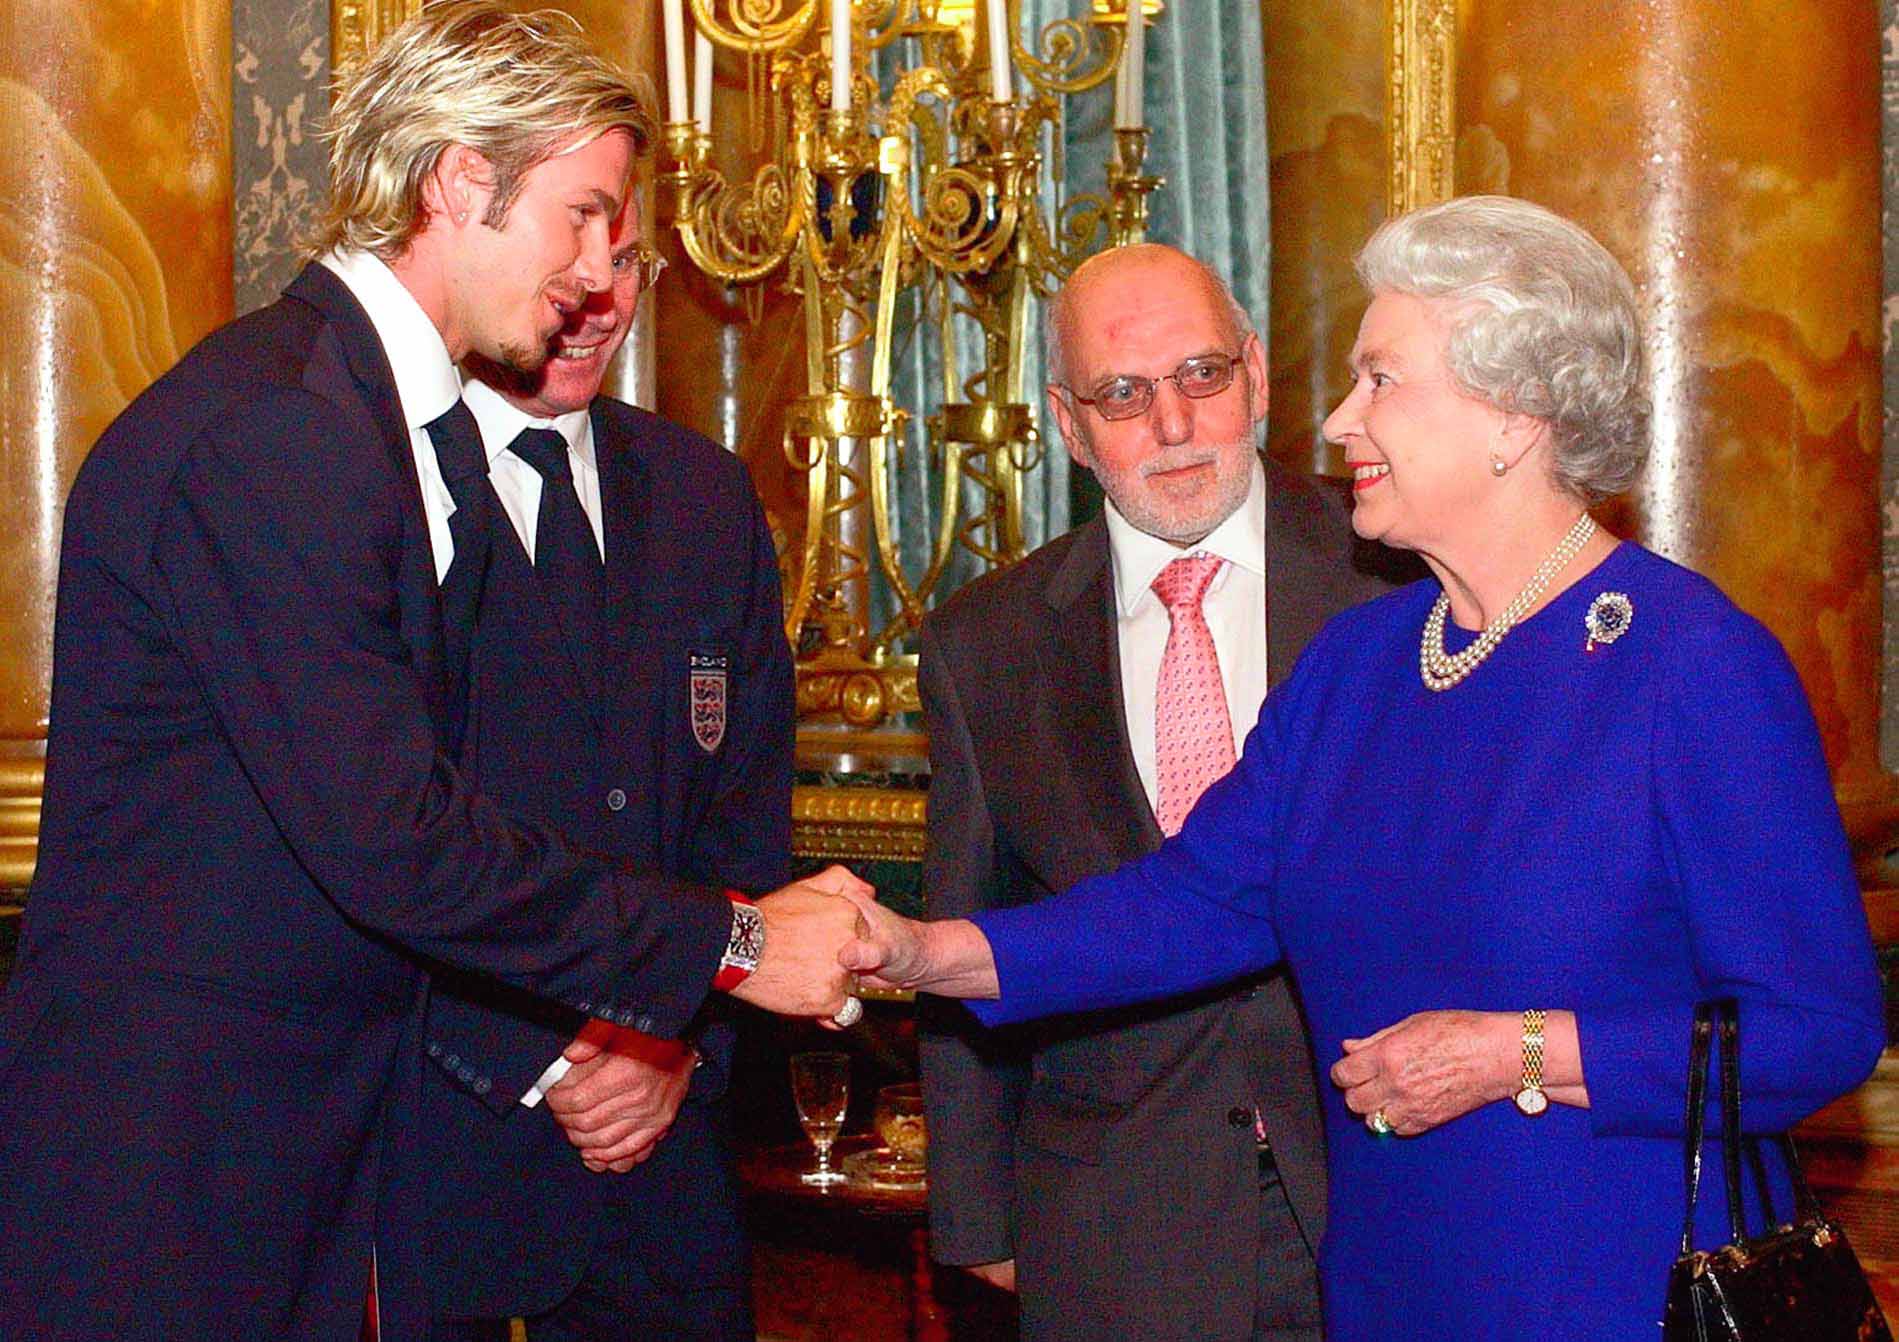 Britain’s Queen Elizabeth II meets England soccer captain David Beckham, watched by English Football Association Chairman Geoffrey Thompson, and England coach Sven Goran-Ericsson, partly hidden, during a reception for the Football Association held at Buckingham Palace in London, Tuesday Nov. 19, 2002. The 75-strong England party included backroom staff as well as high profile players and management.(AP Photo/Kirsty Wigglesworth/pool)